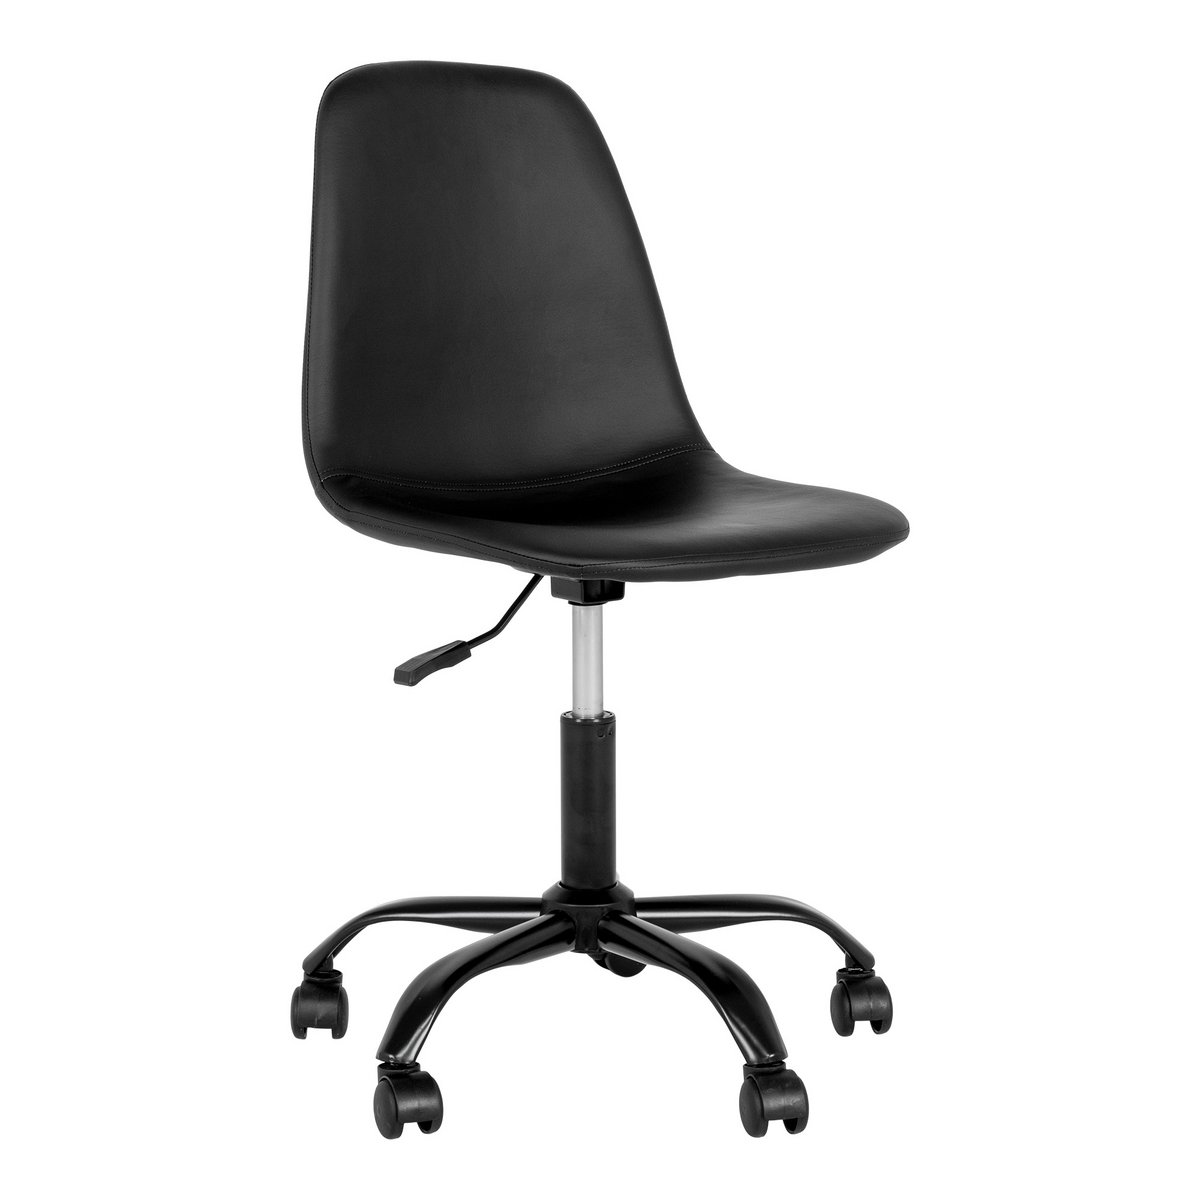 Stockholm office chair